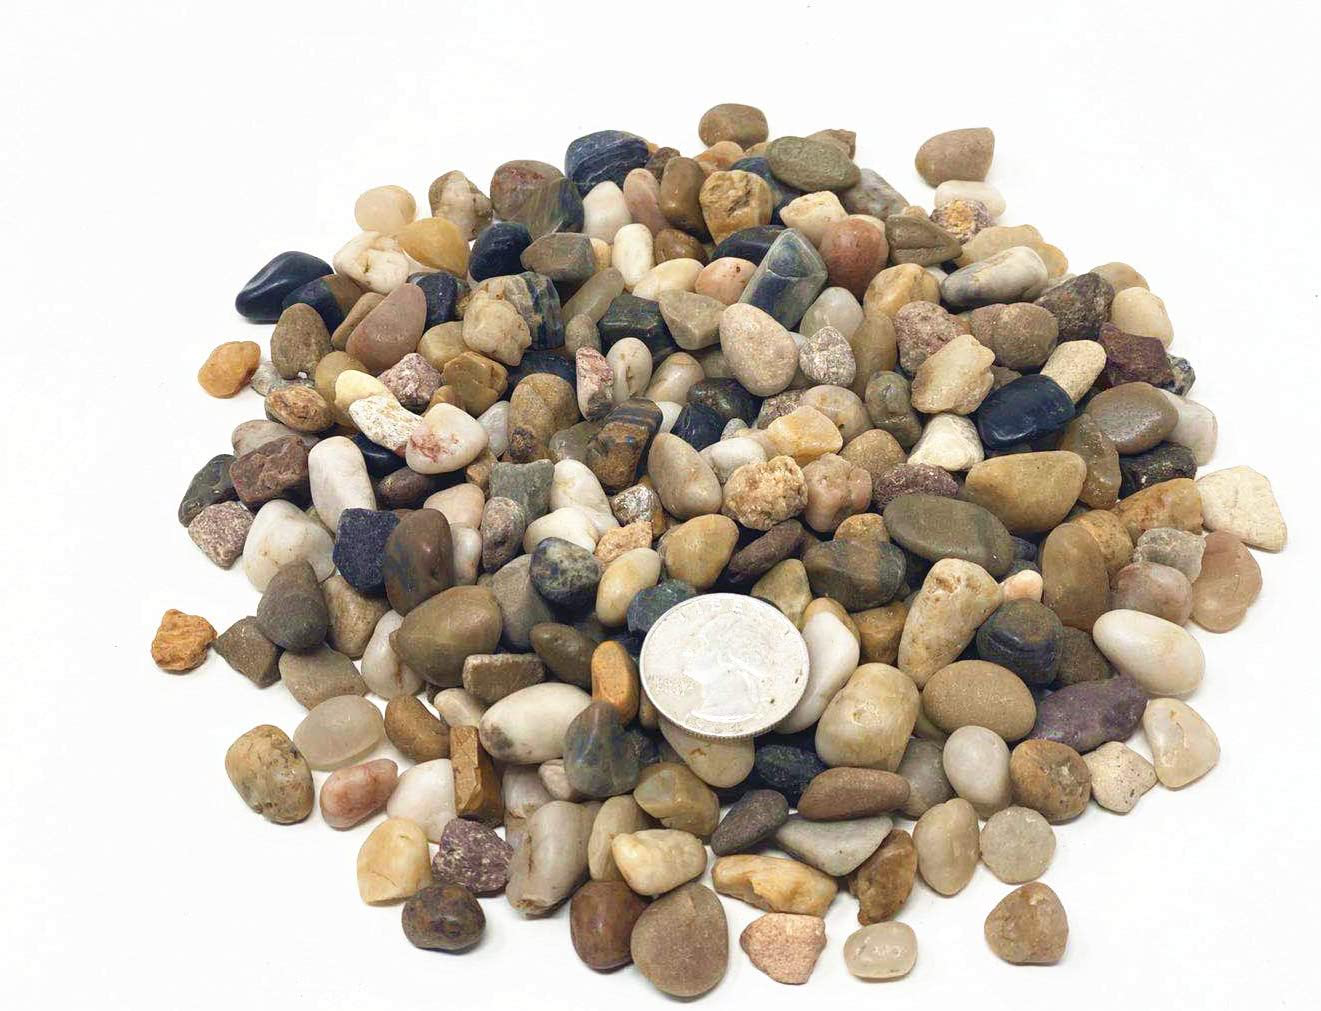  Cayway Decorative Natural Pebbles Natural Decorative Real Sand  for Plants and Vases, 2Ib Natural Decorative Pebbles and 100G Natural Sand  for Potted Plants and Succulents, Fish Tank, Mini Garden : Patio